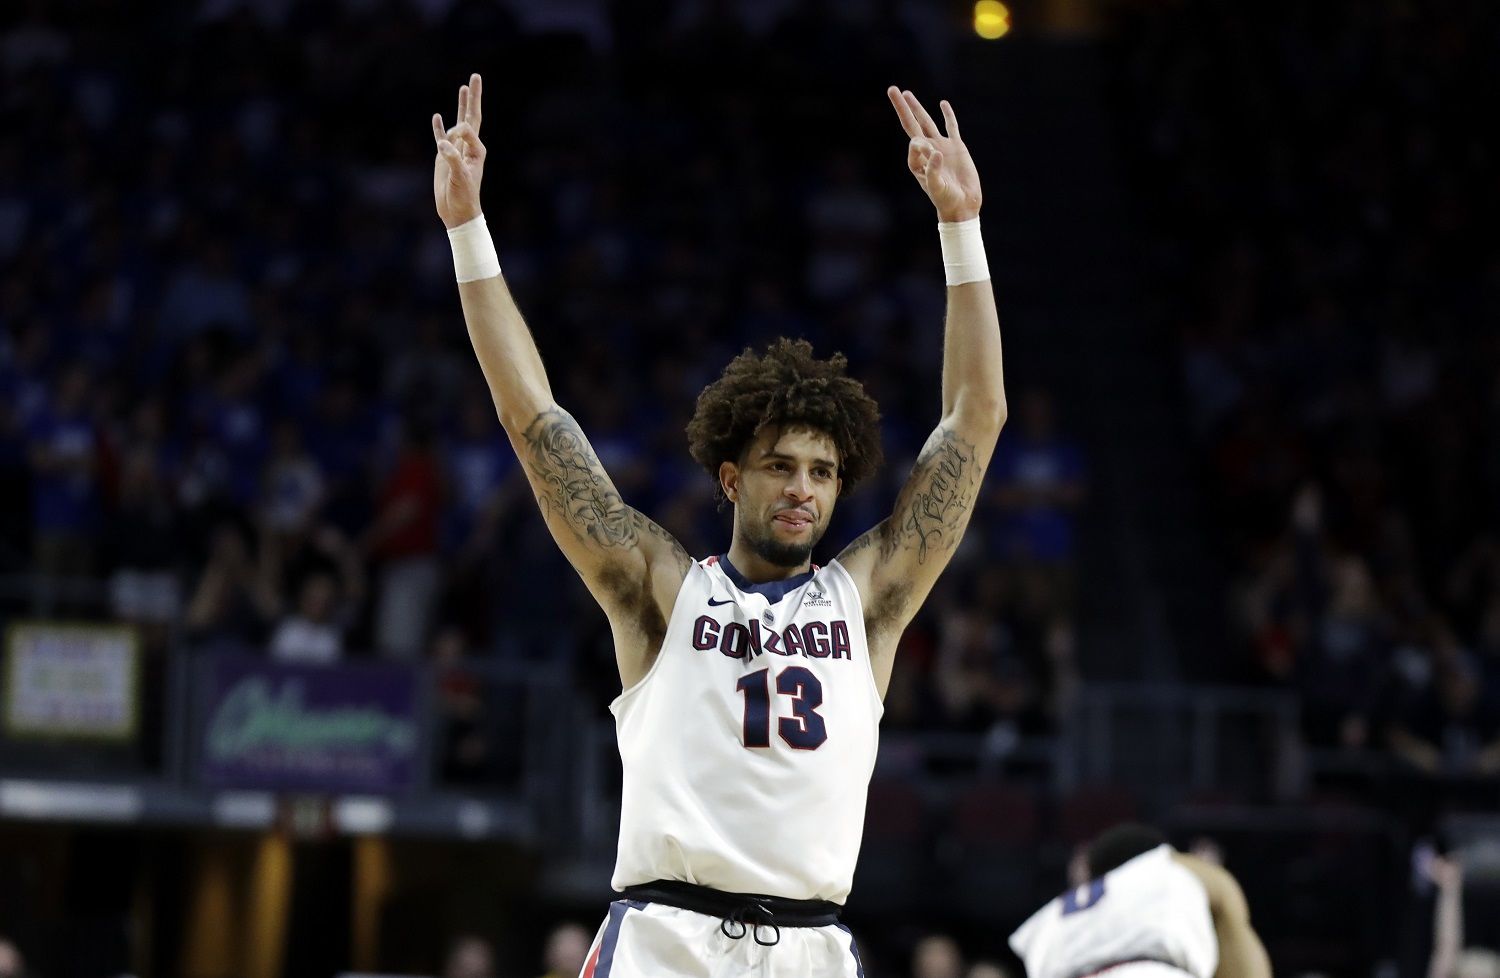 Gonzaga's Josh Perkins reacts after sinking a 3-point shot during the second half of the West Coast Conference tournament championship NCAA college basketball game BYU Tuesday, March 6, 2018, in Las Vegas. Gonzaga defeated BYU 74-54. (AP Photo/Isaac Brekken)